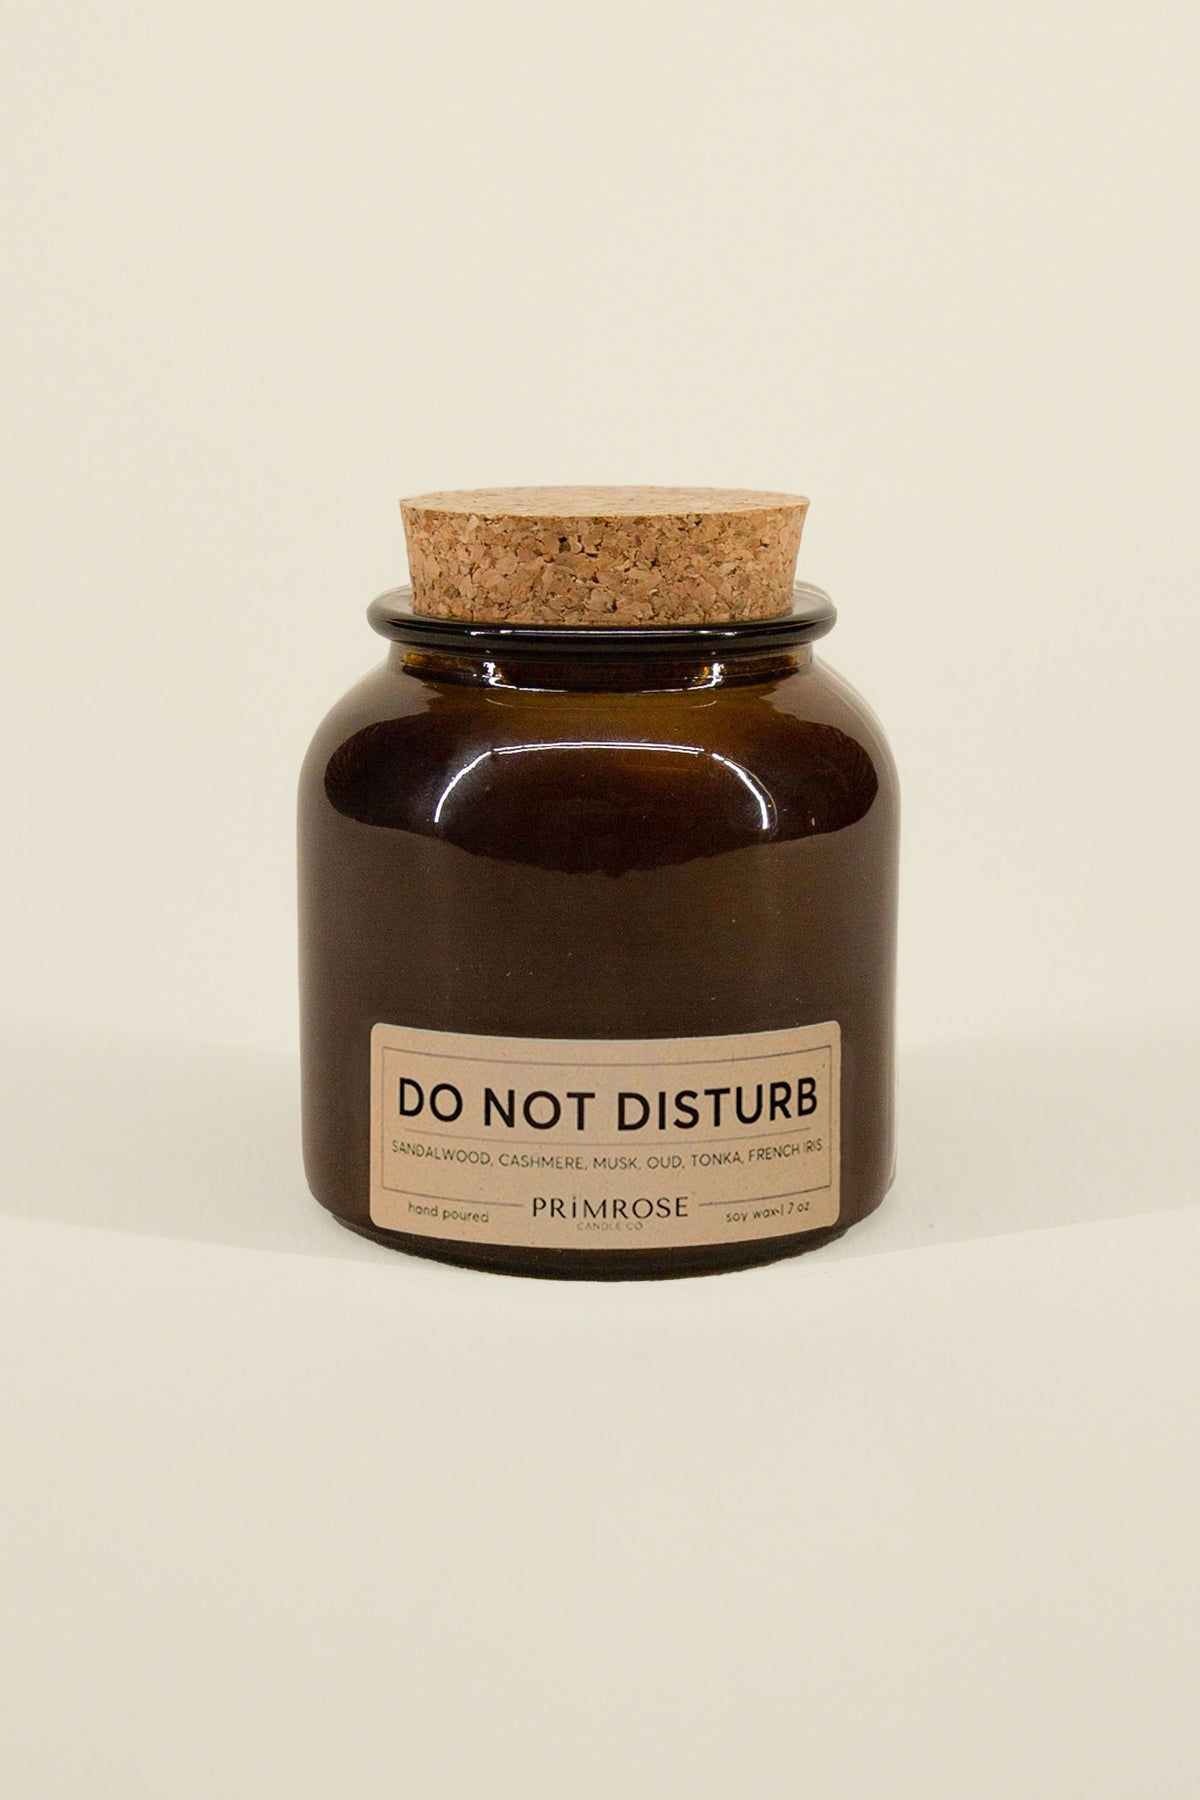 do not disturb candle